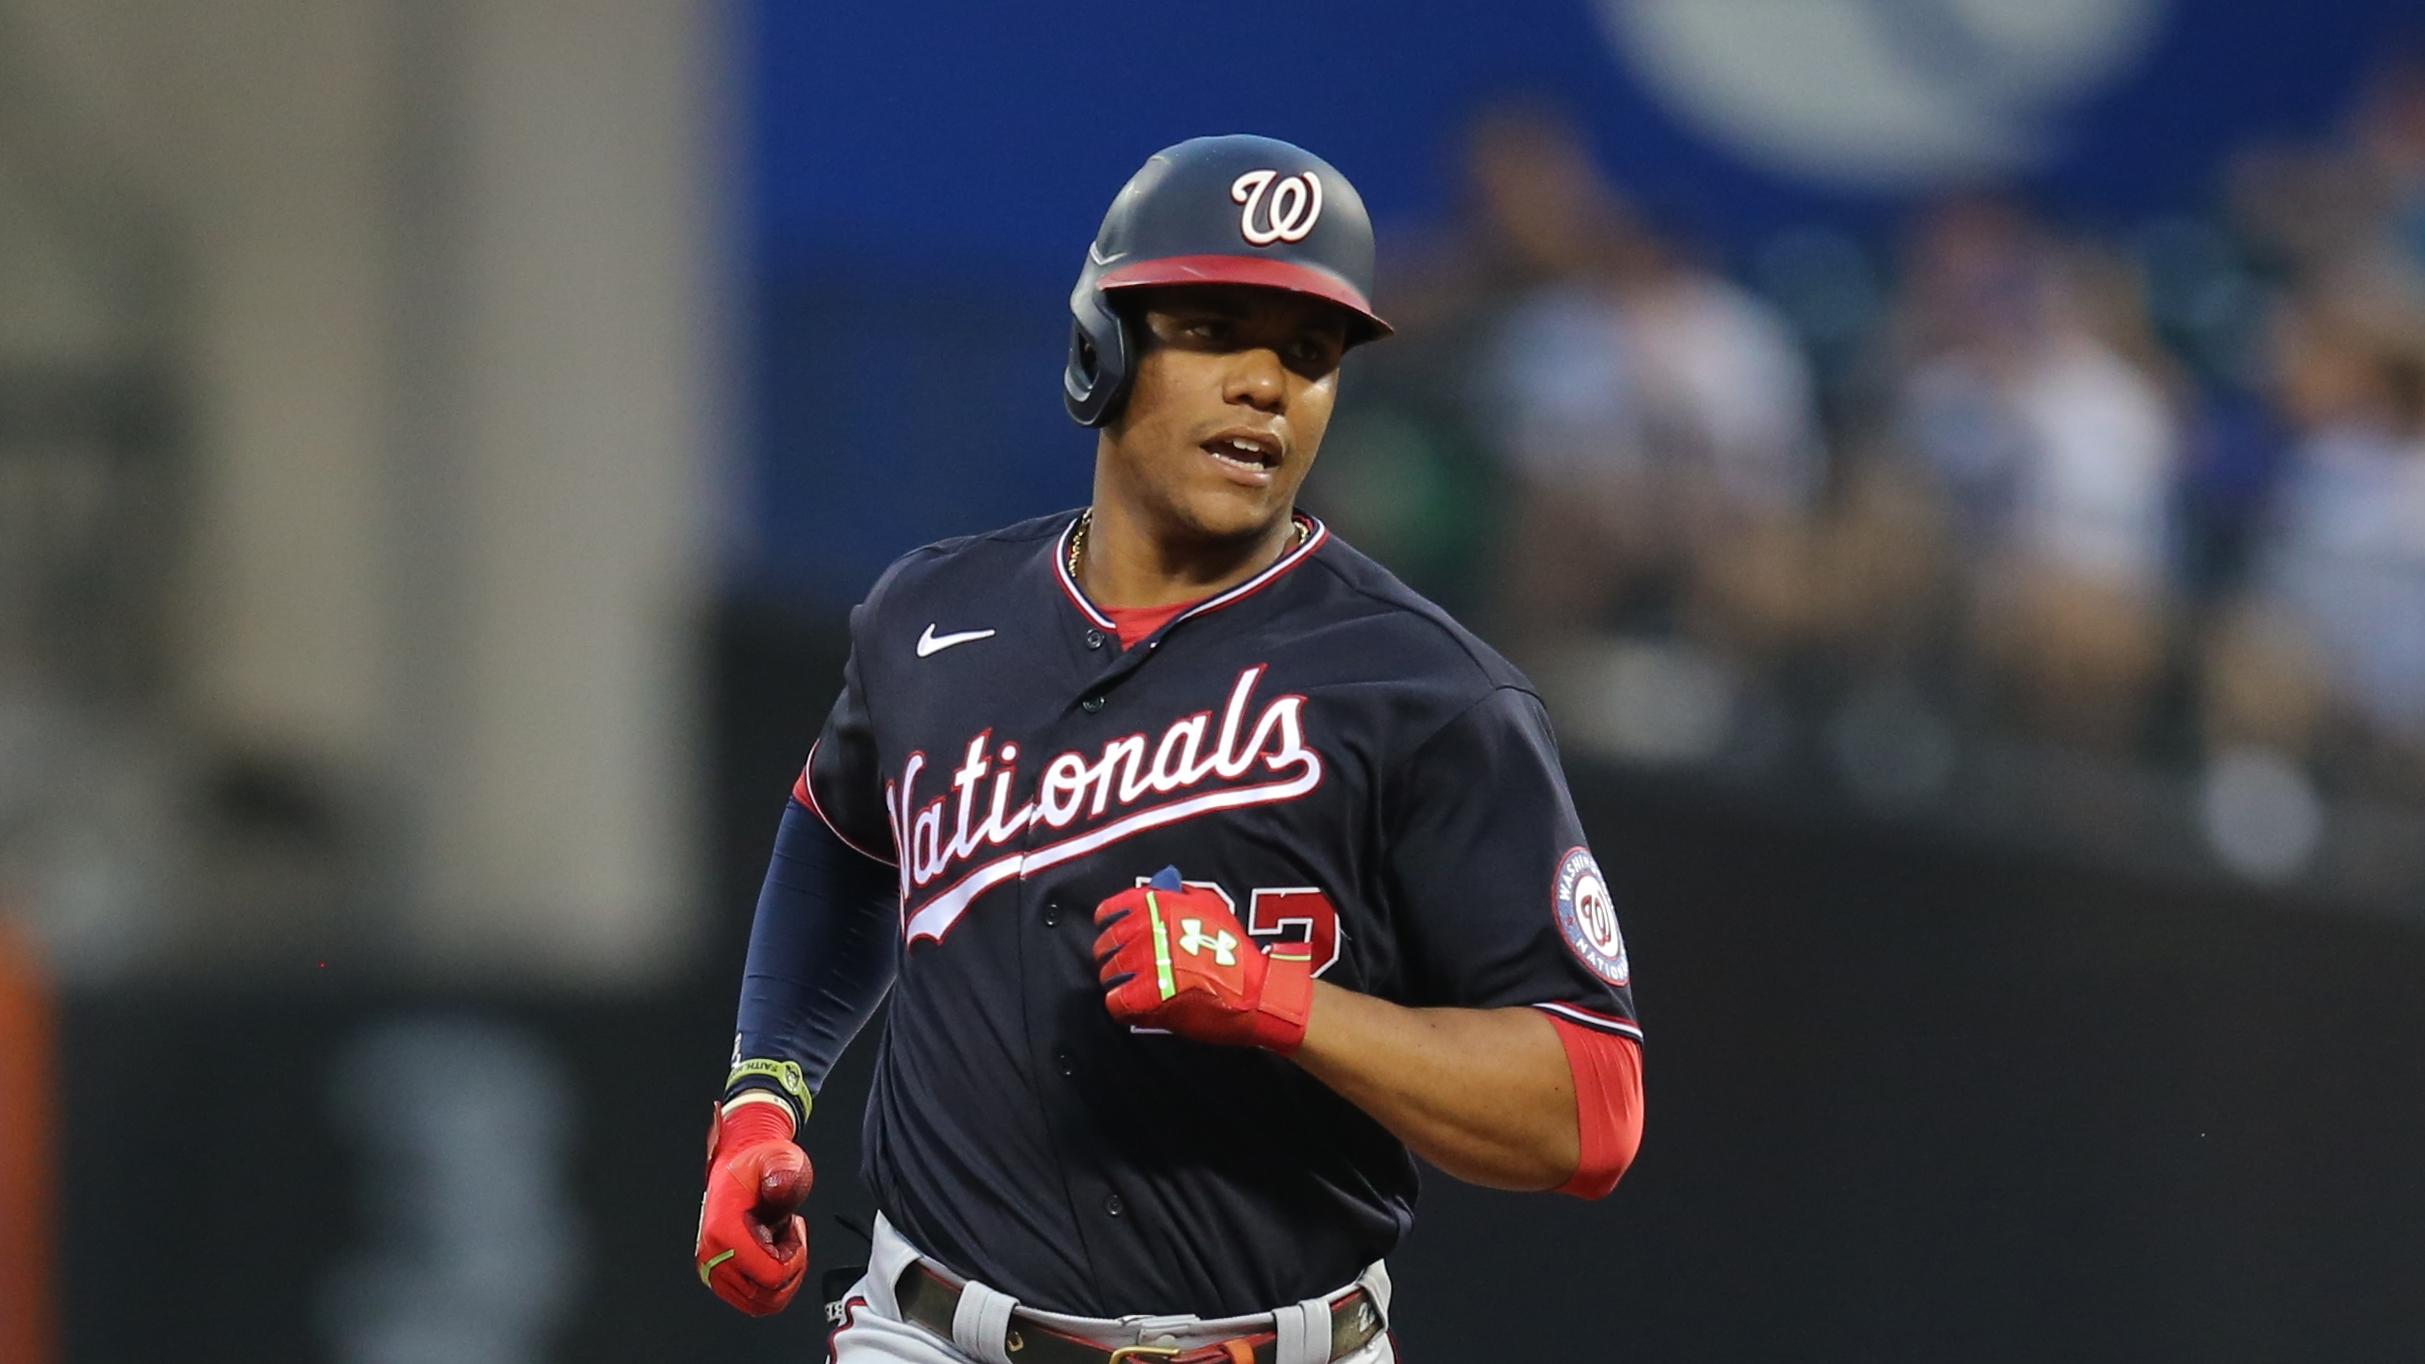 Washington Nationals right fielder Juan Soto (22) rounds the bases after hitting a three run home run against the New York Mets during the first inning at Citi Field. / Brad Penner-USA TODAY Sports